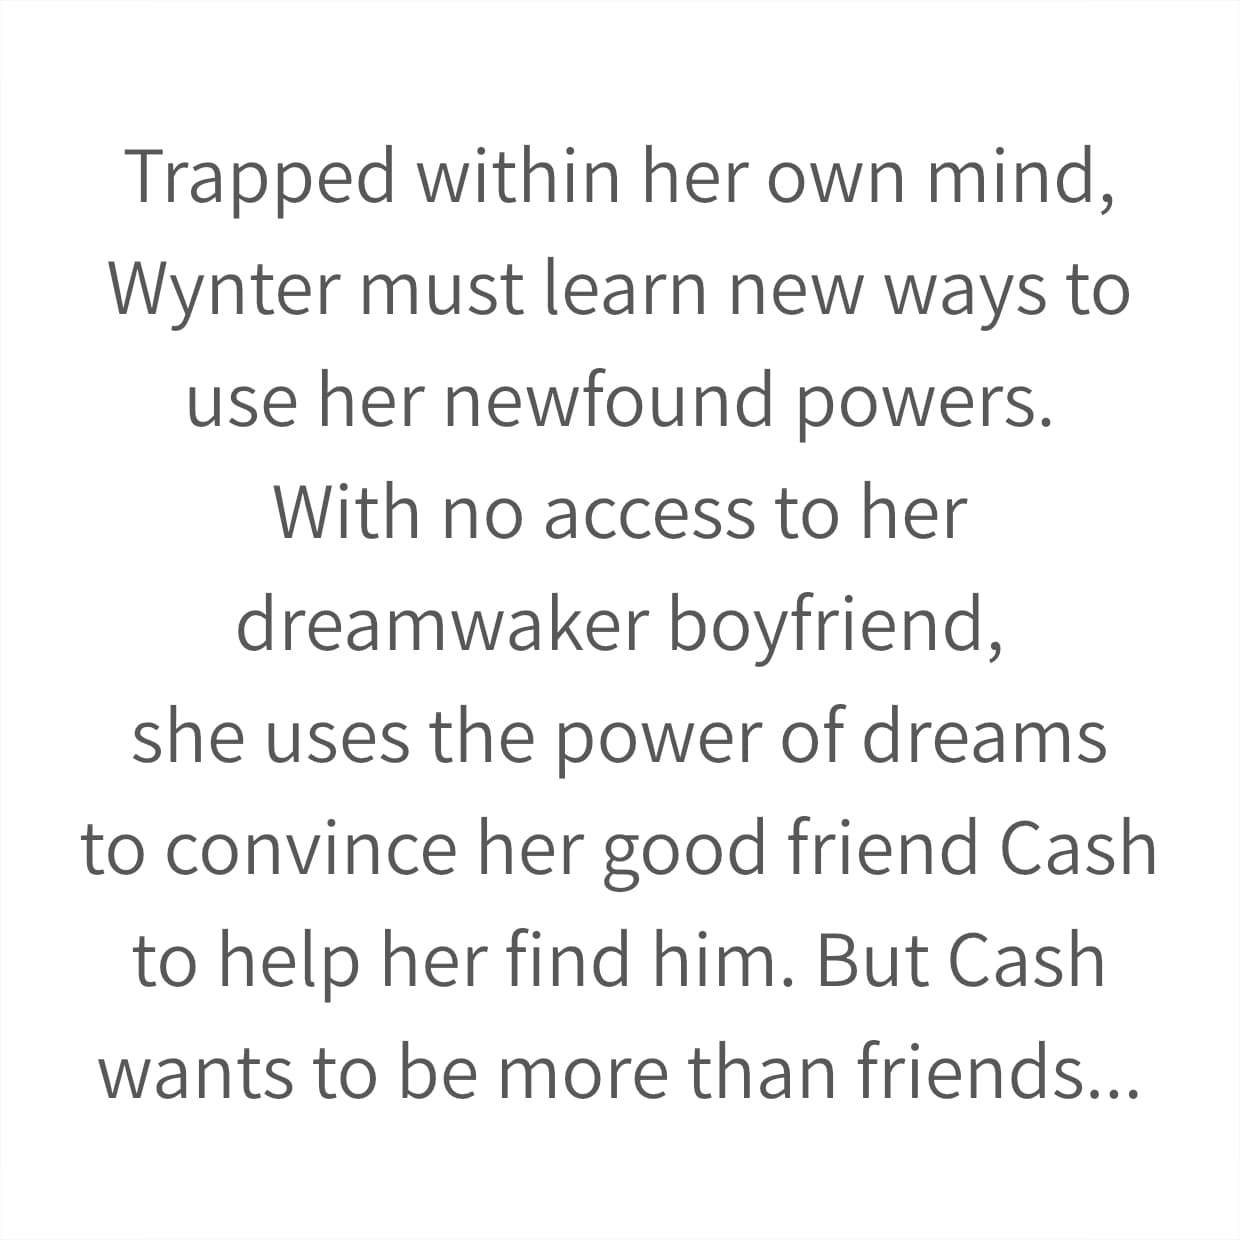 Trapped within her own mind, Wynter must learn new ways to use her newfound powers. With no access to her dreamwaker boyfriend, she uses the power of dreams to convince her good friend Cash to help her find him. But Cash wants to be more than friends...